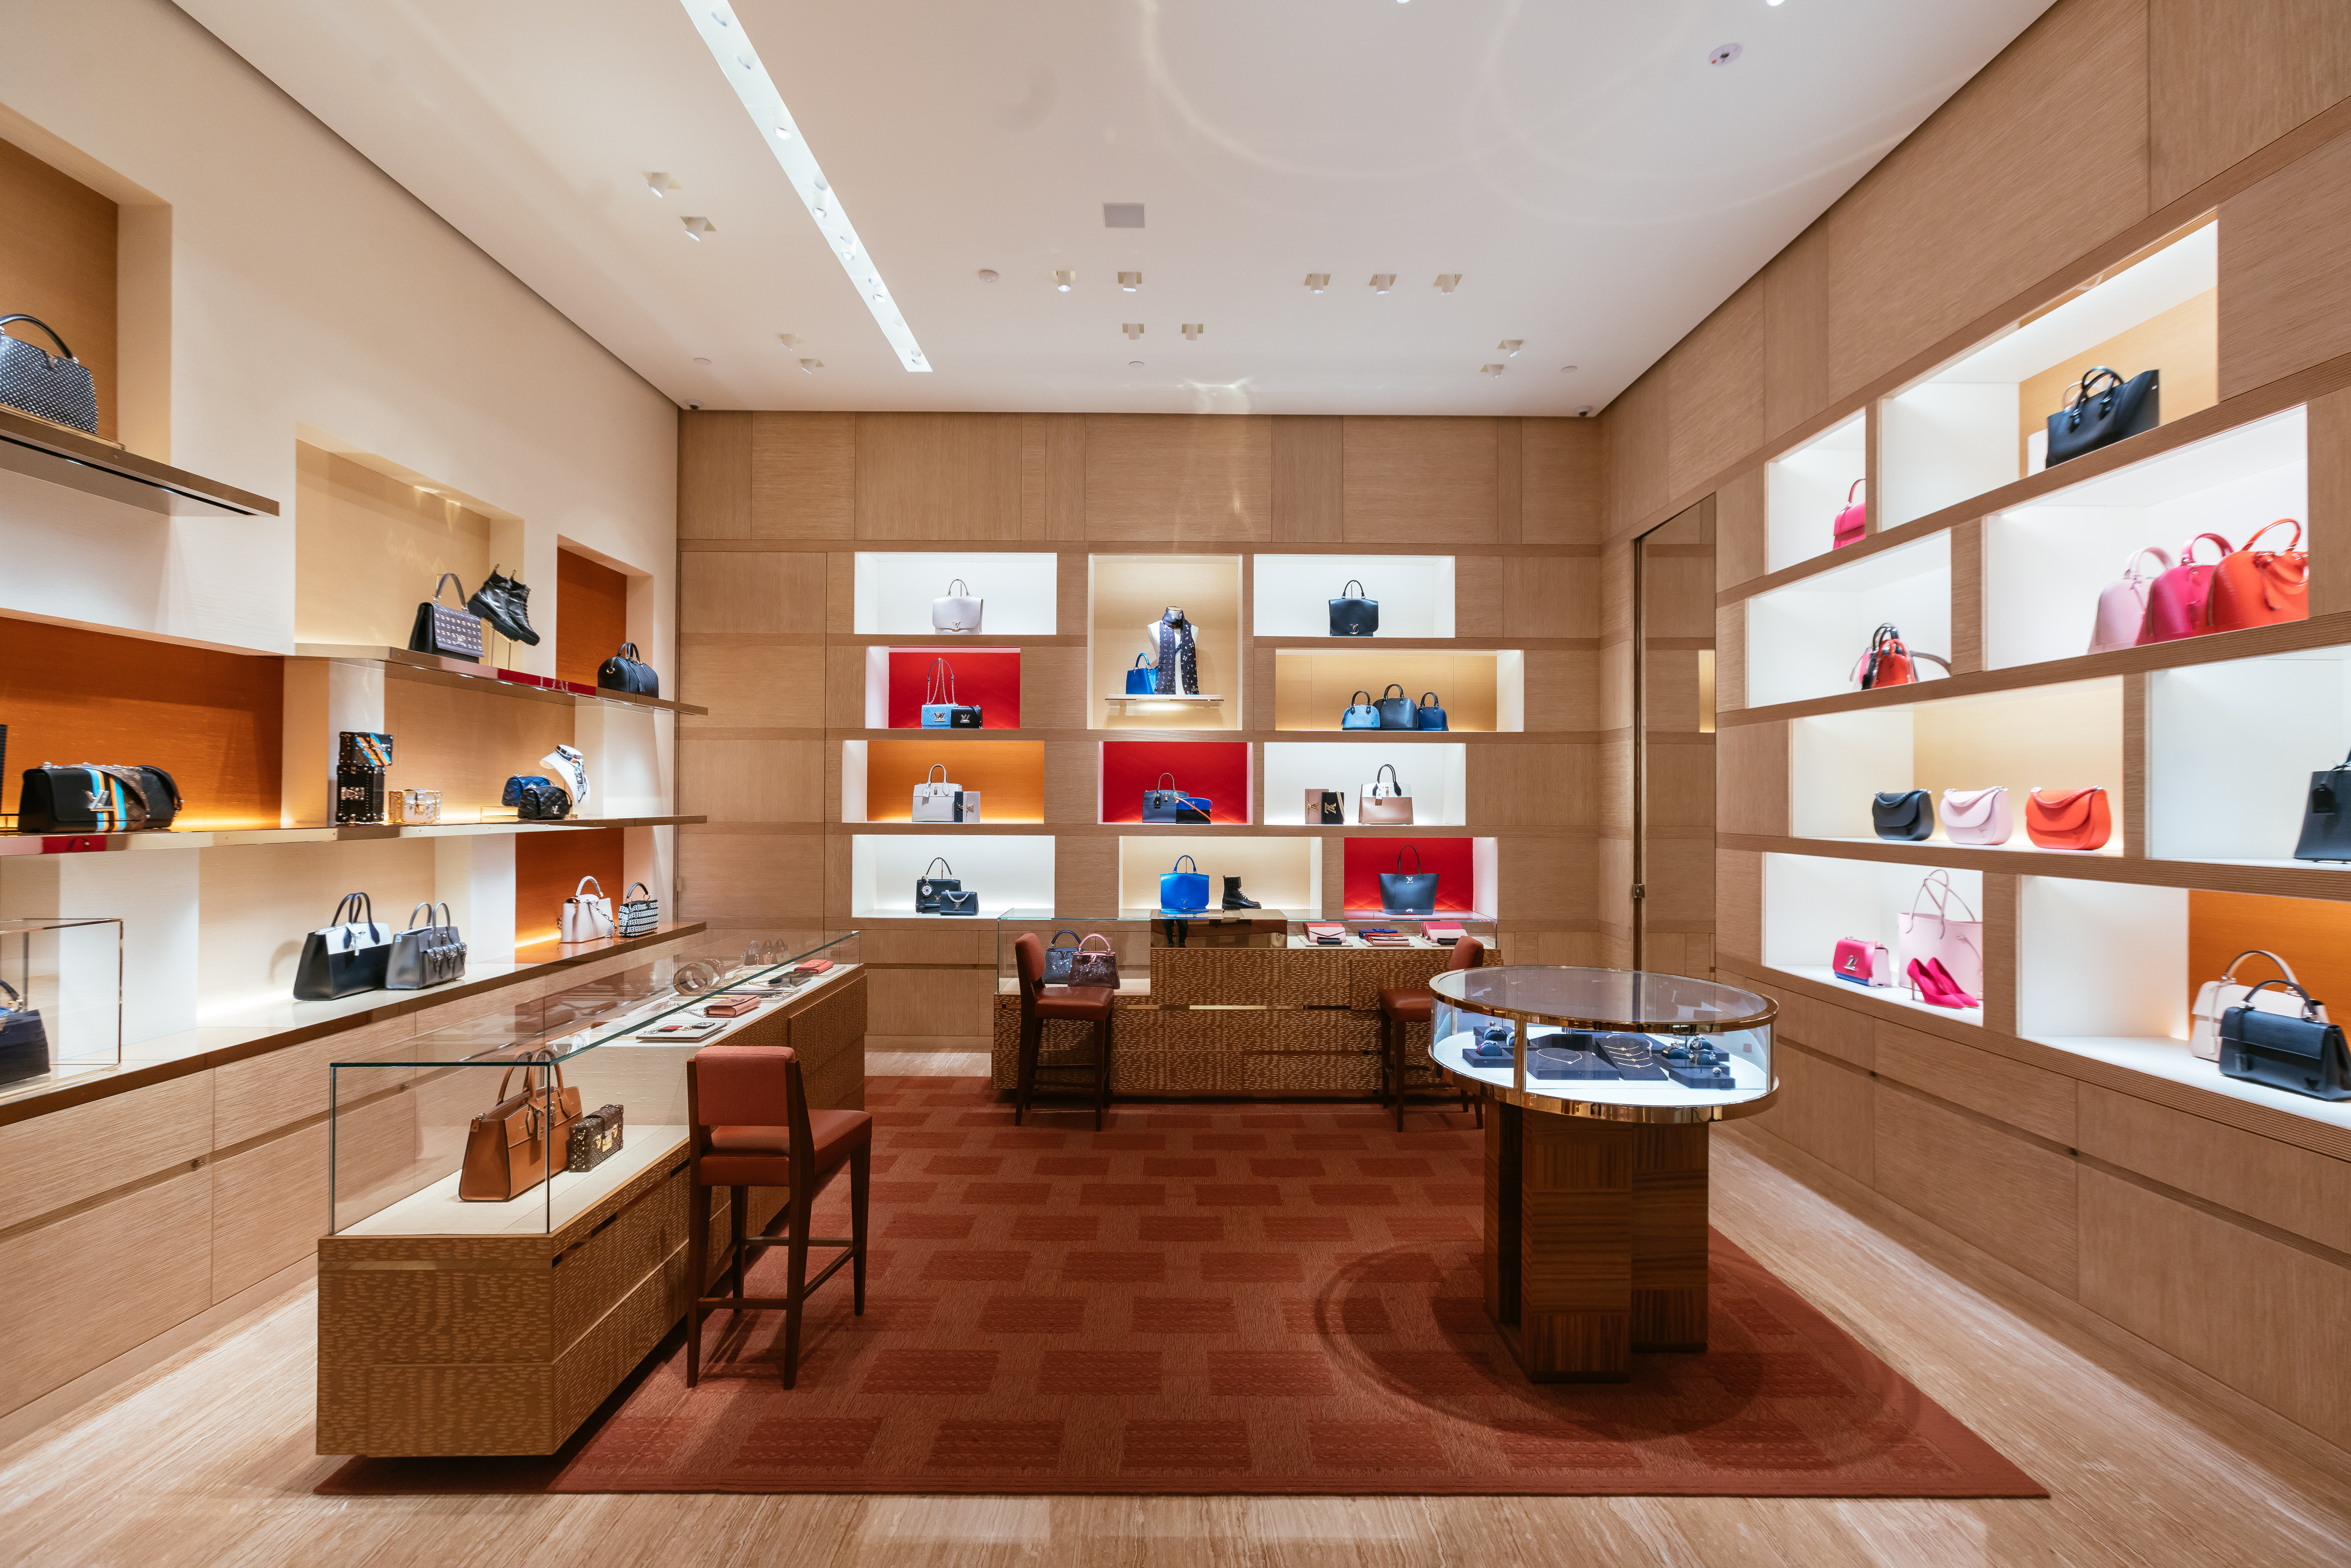 Fendi opens the doors to its newly renovated flagship boutique at